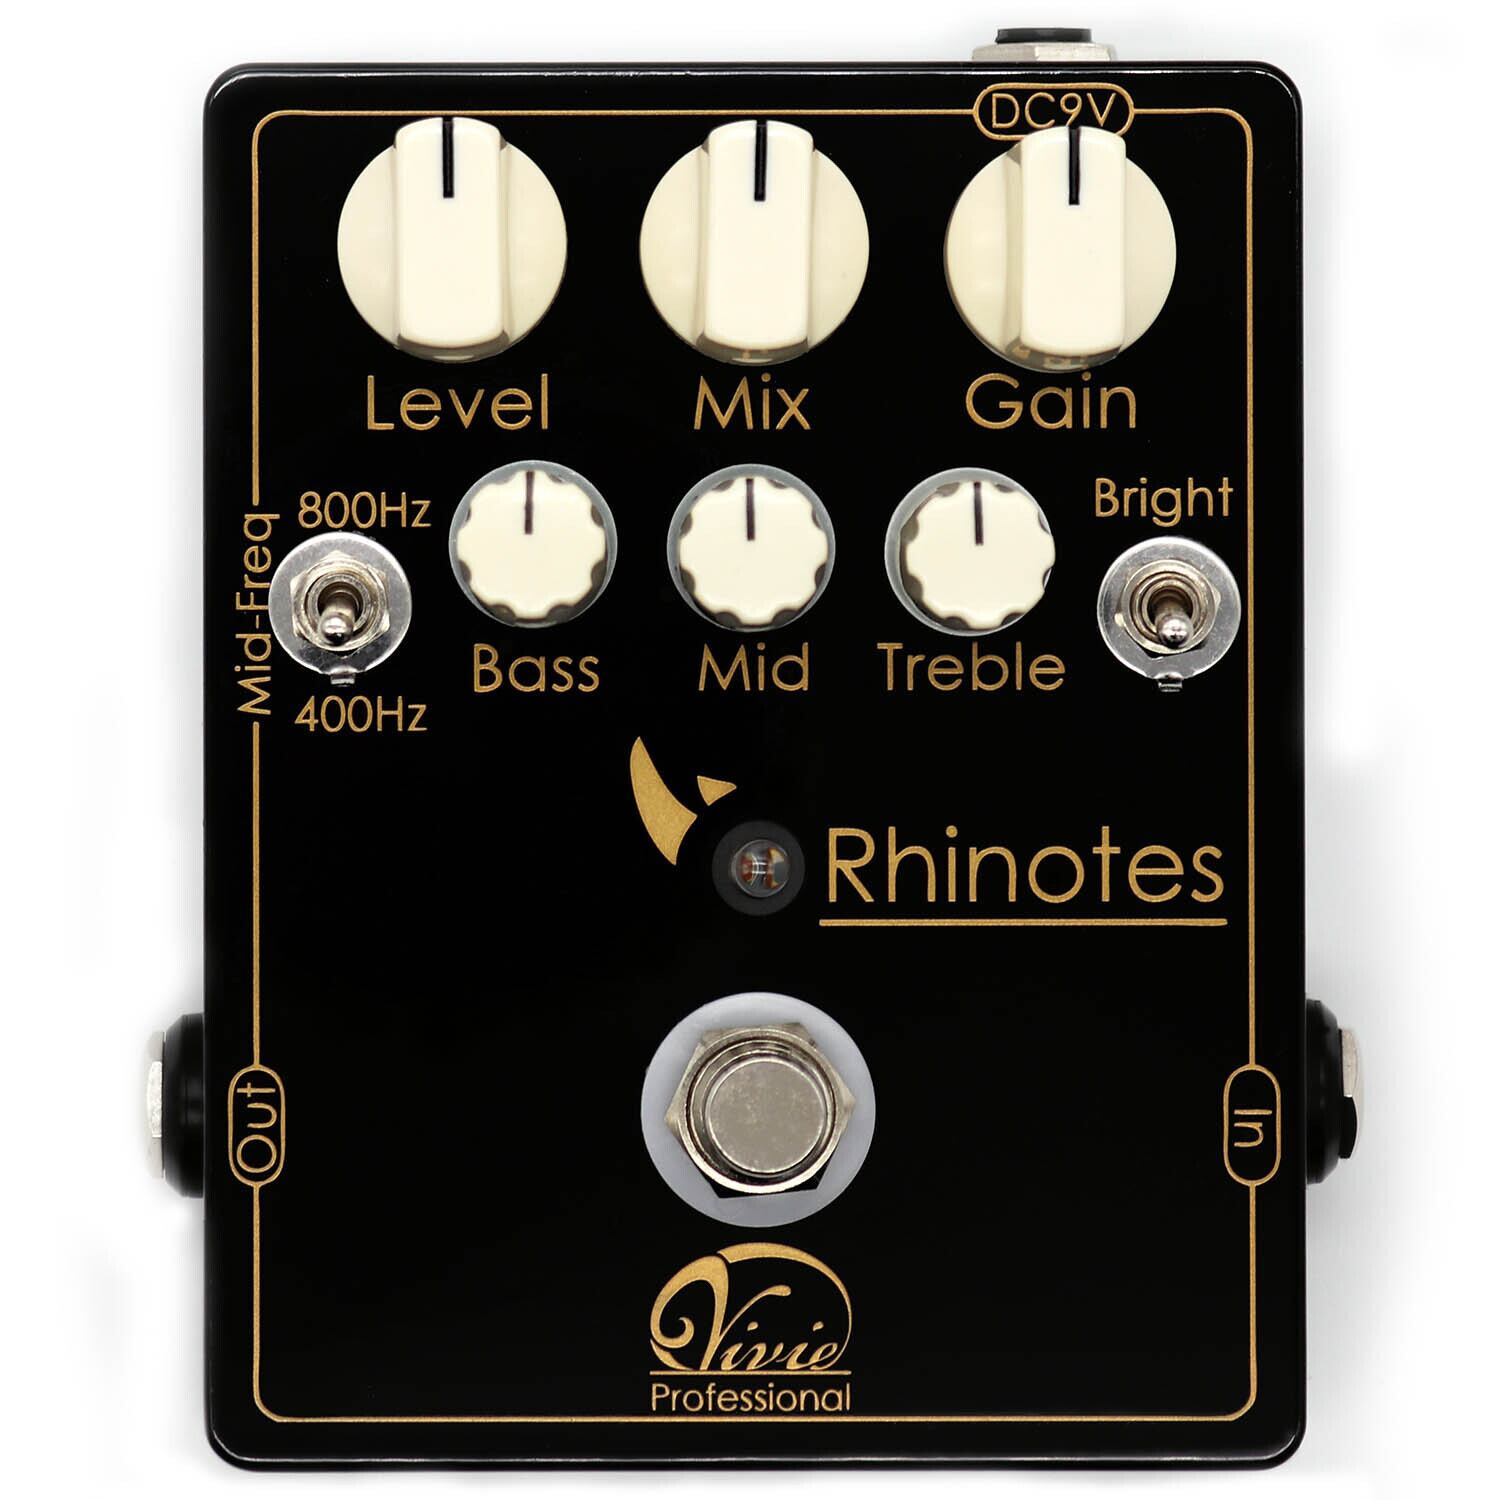 Rhinotes (Bass OverDrive) | Vivie-effect Online Shop for outside of Japan